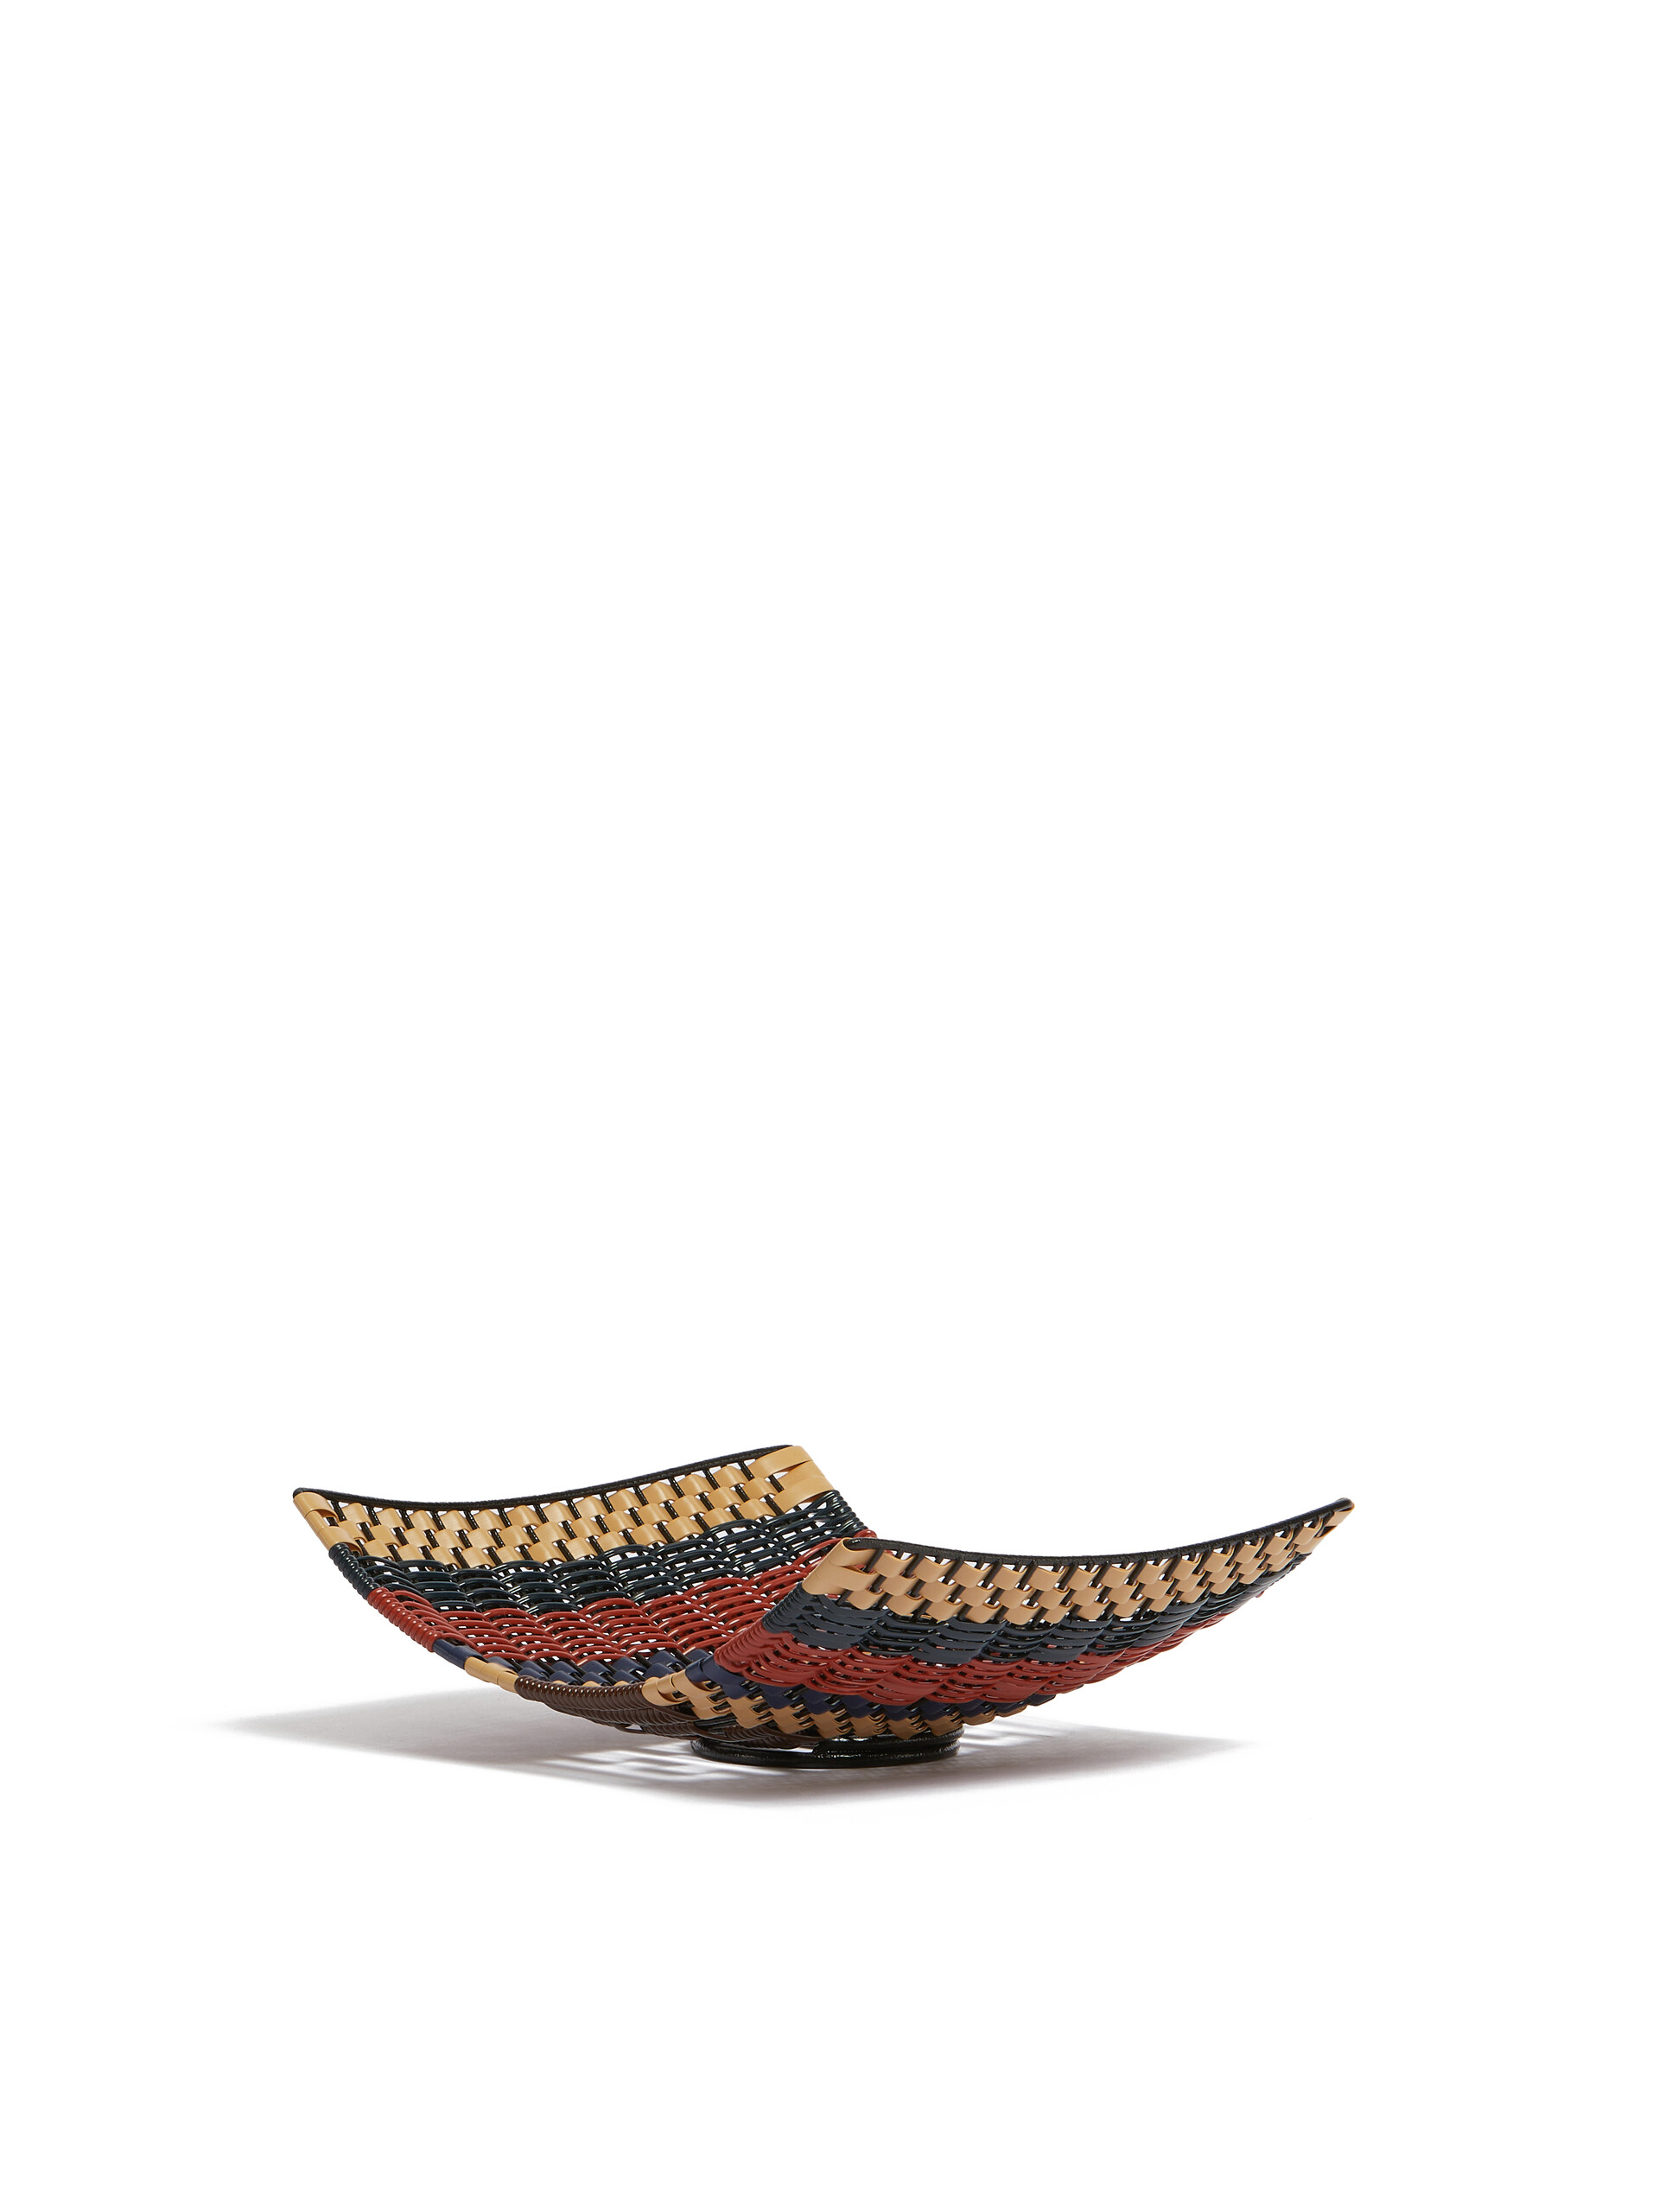 Blue and red Marni Market woven curved tray - Furniture - Image 2